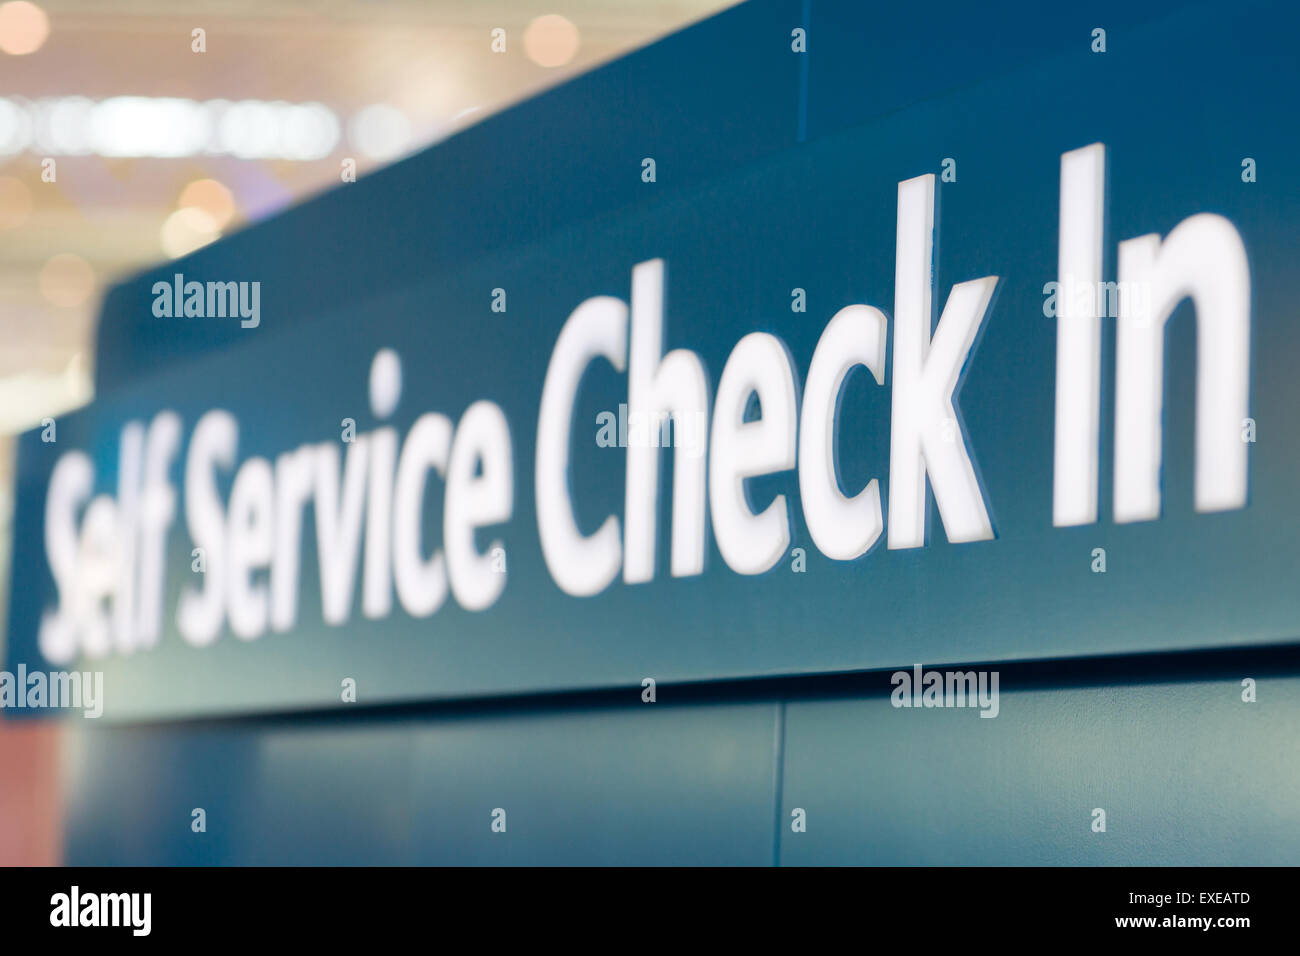 Self service check in sign at airport Banque D'Images